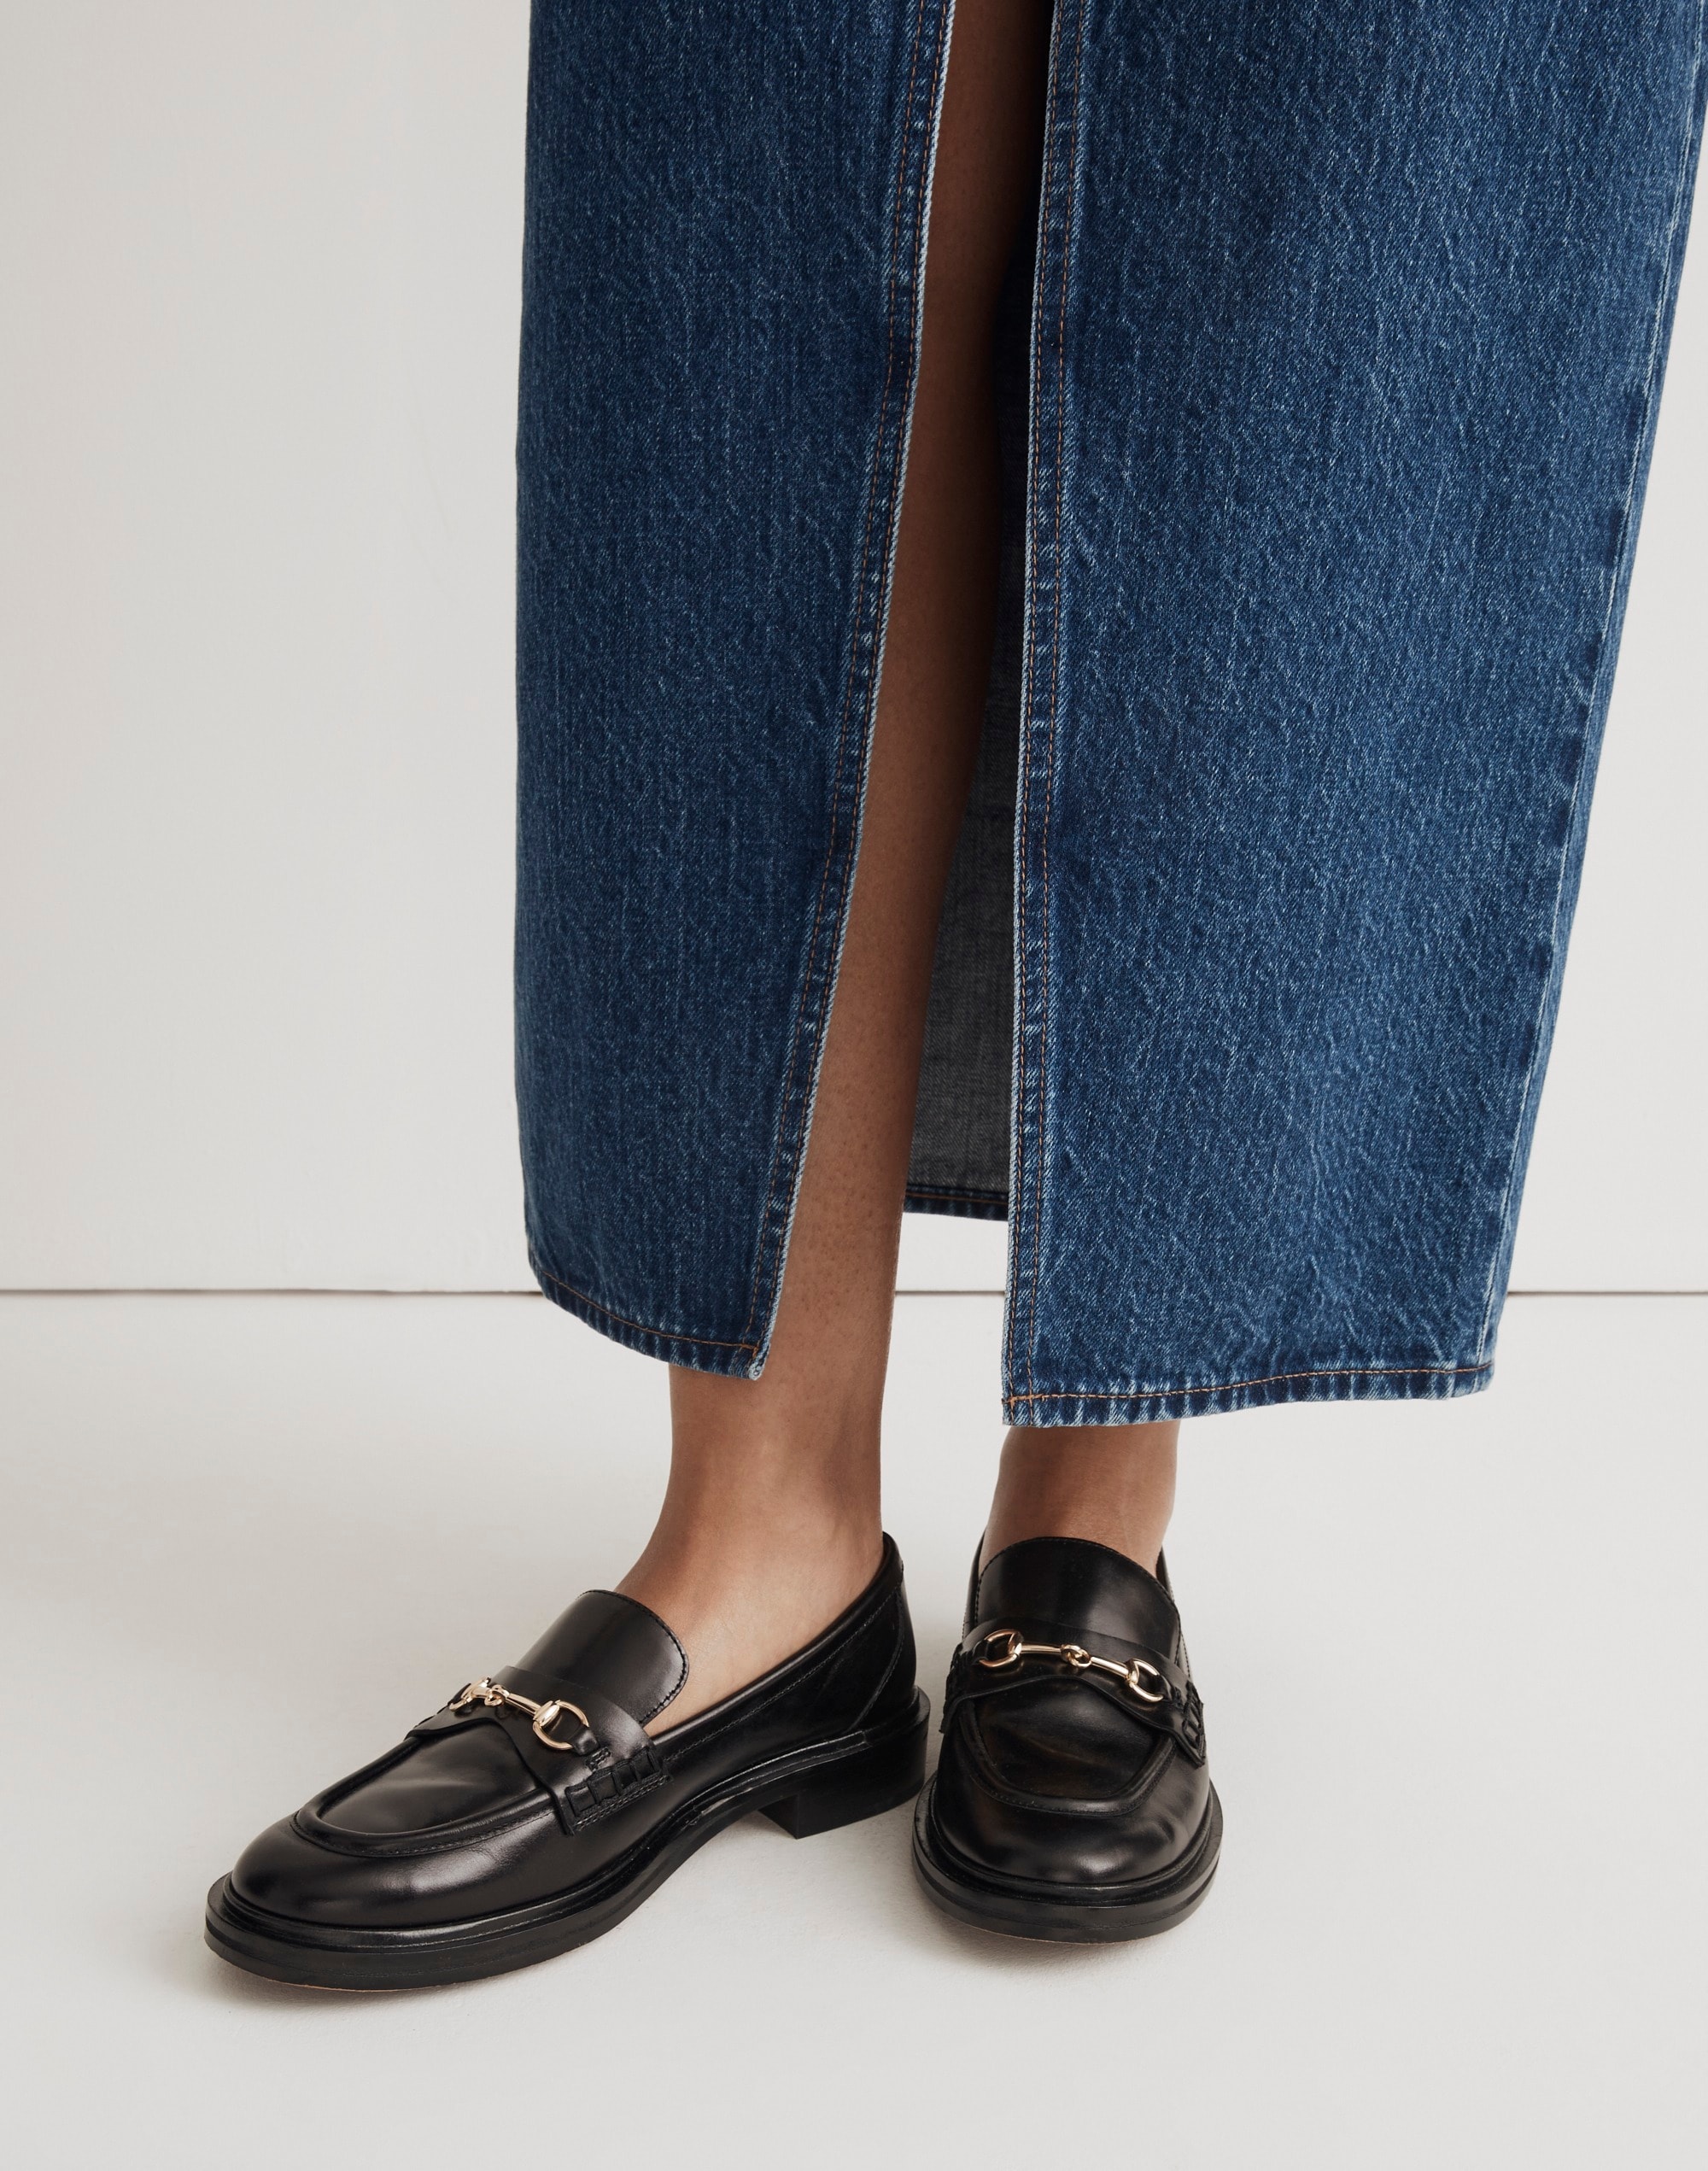 The Vernon Bit Hardware Loafer Leather